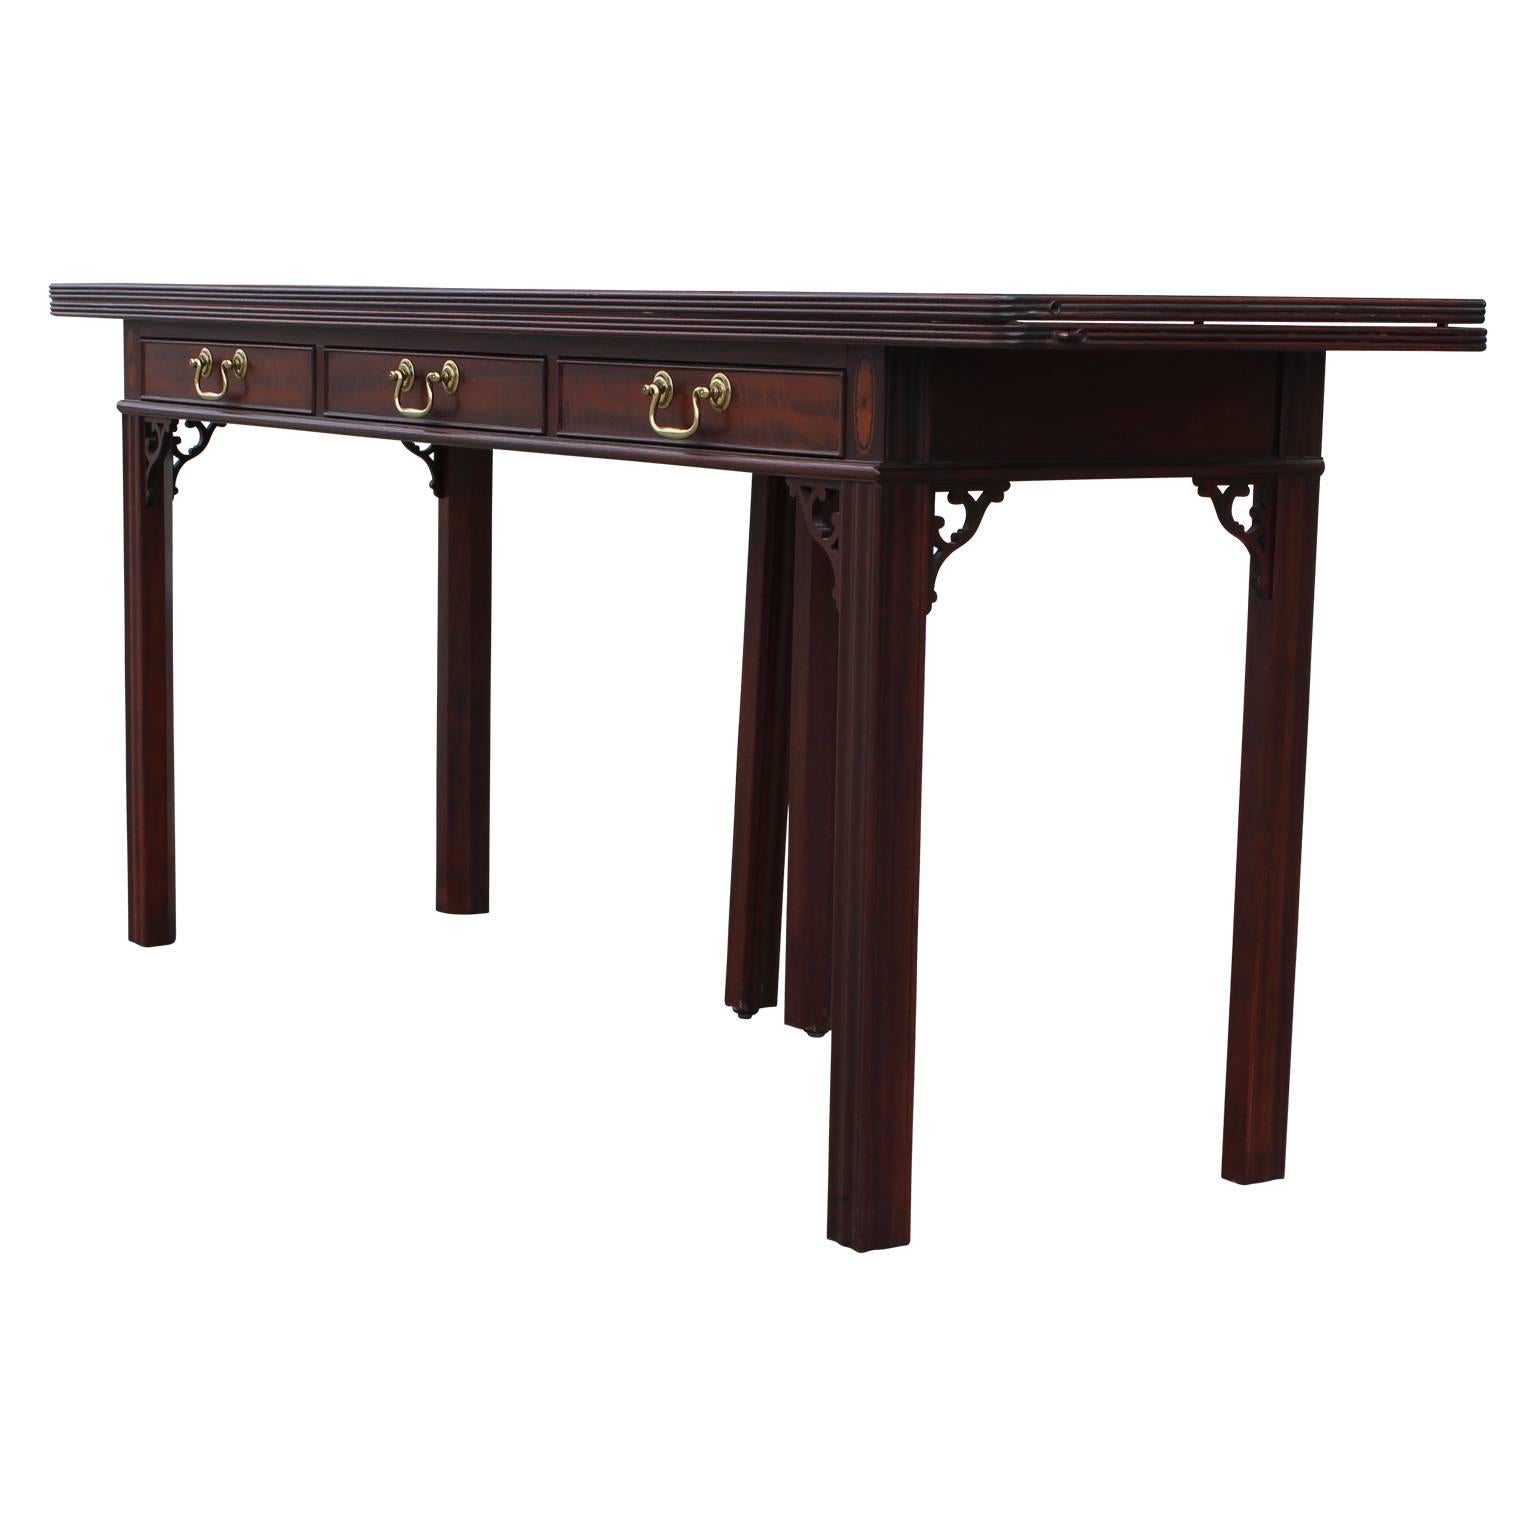 Modern Baker flip-top console table or desk with three drawers and brass hardware. Made from a gorgeous Mahogany. 

Measures: Total depth with top folded out 38 inches.